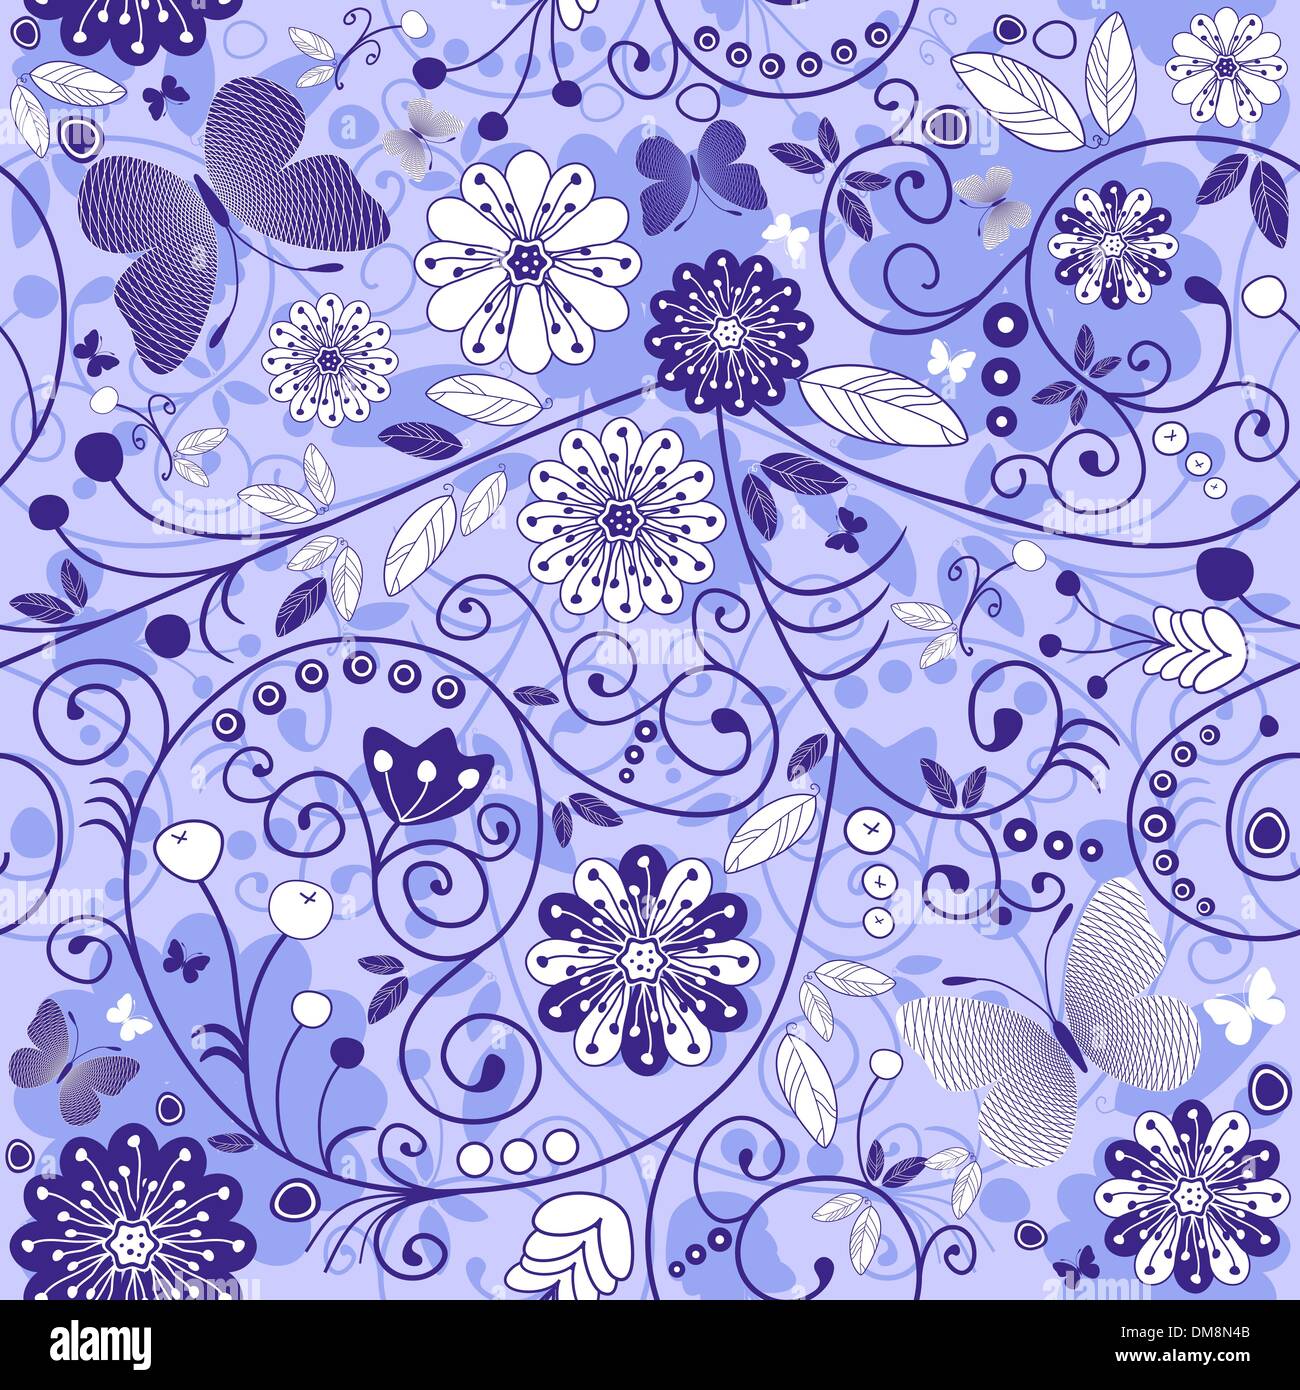 Seamless floral violet-blue pattern Stock Vector